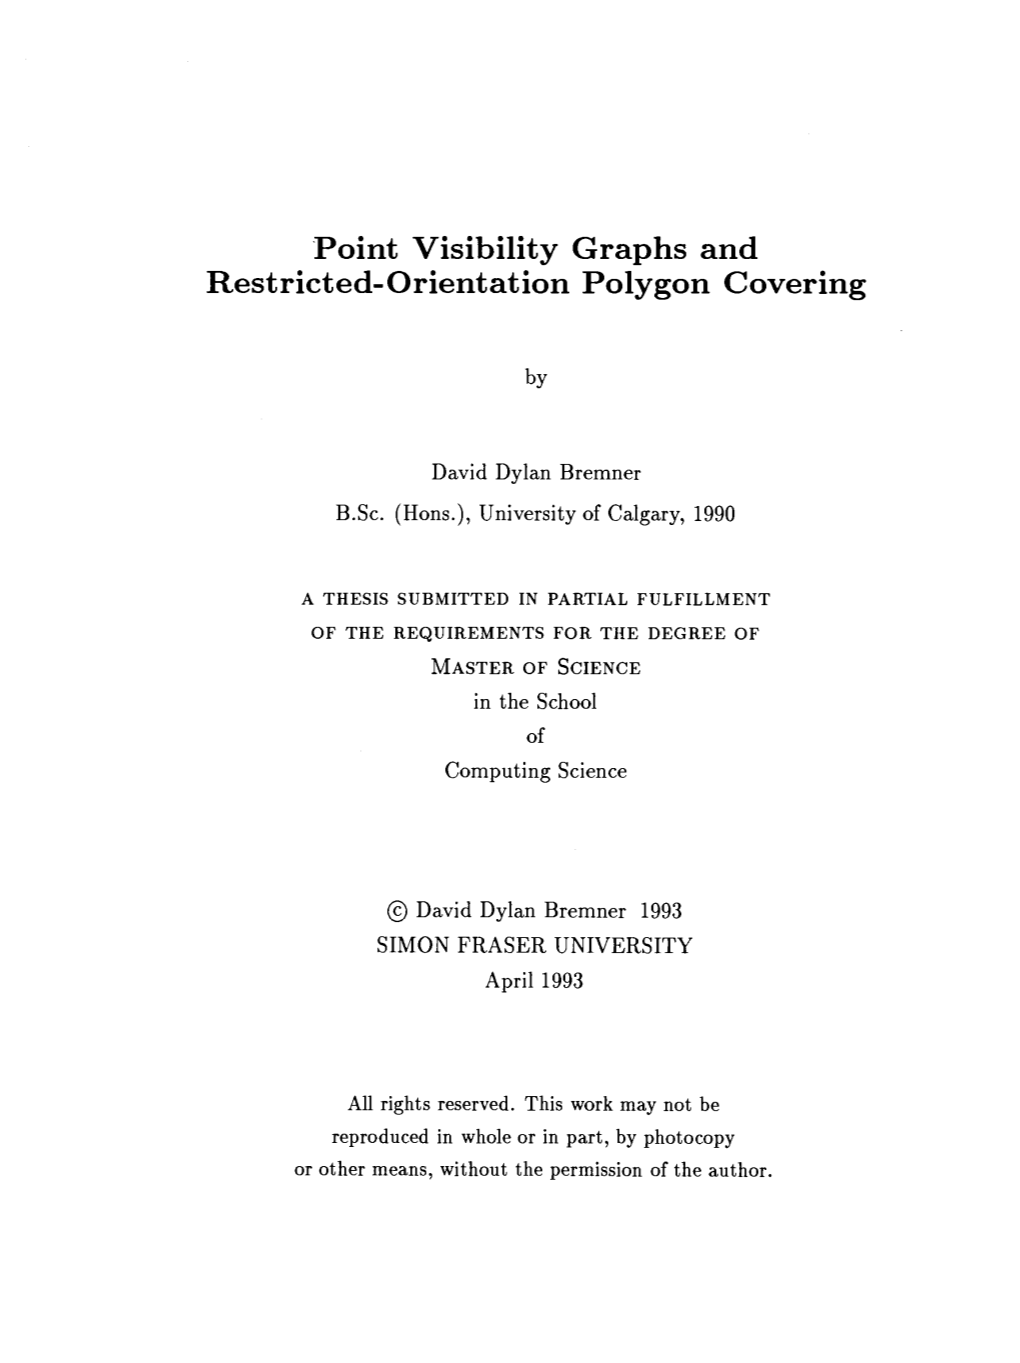 Point Visibility Graphs and Restricted-Orientation Polygon Covering / by David Dylan Bremner